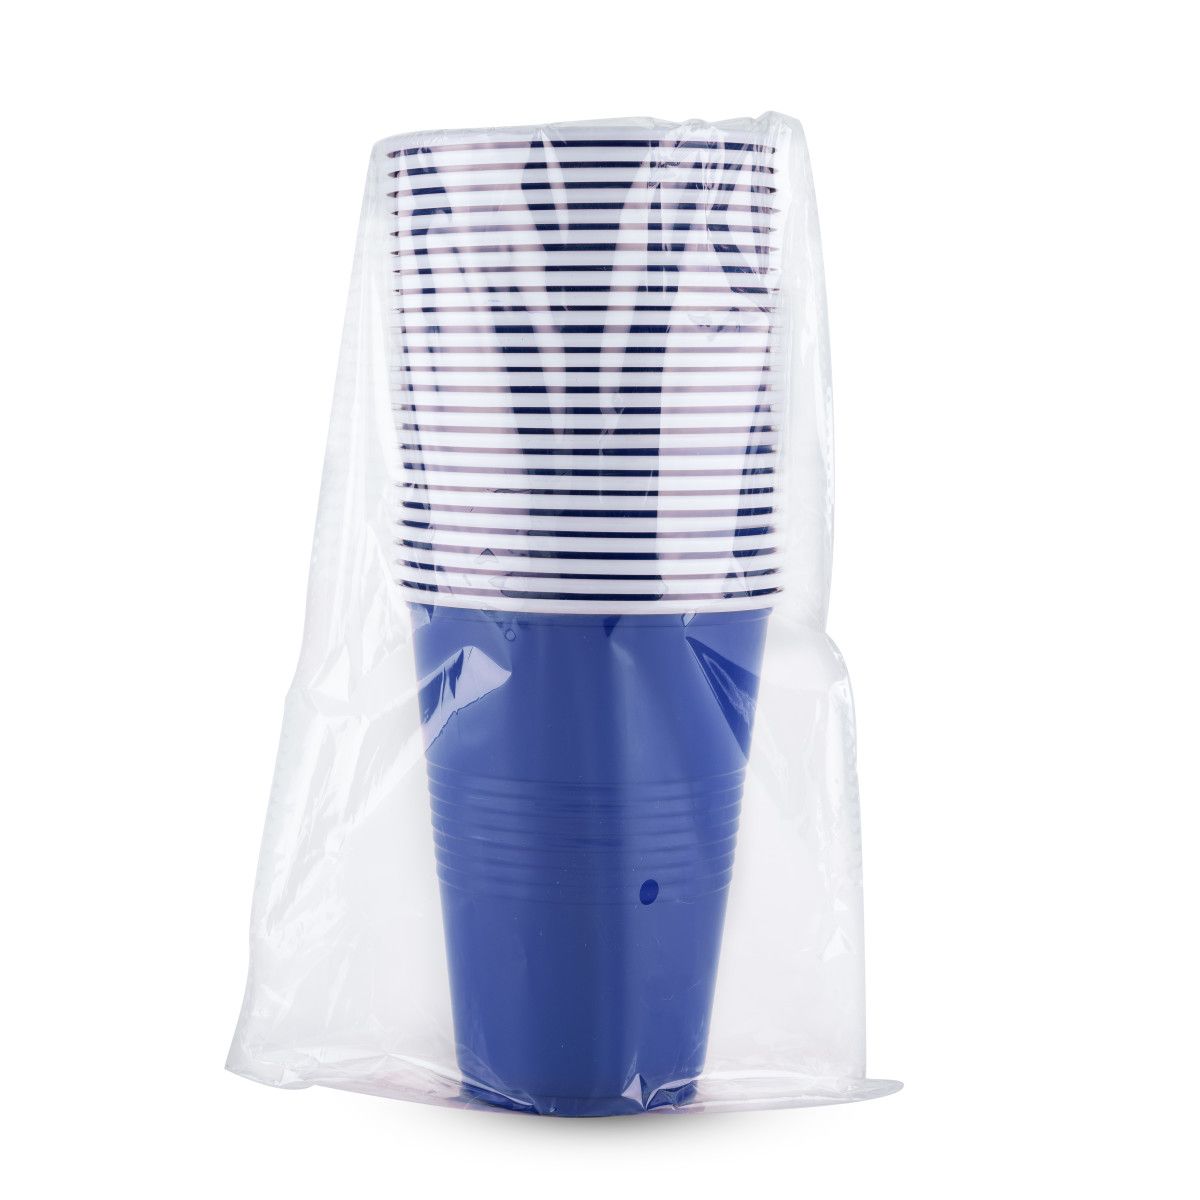 LED 16 oz. Disposable Party Cups - 24 pack